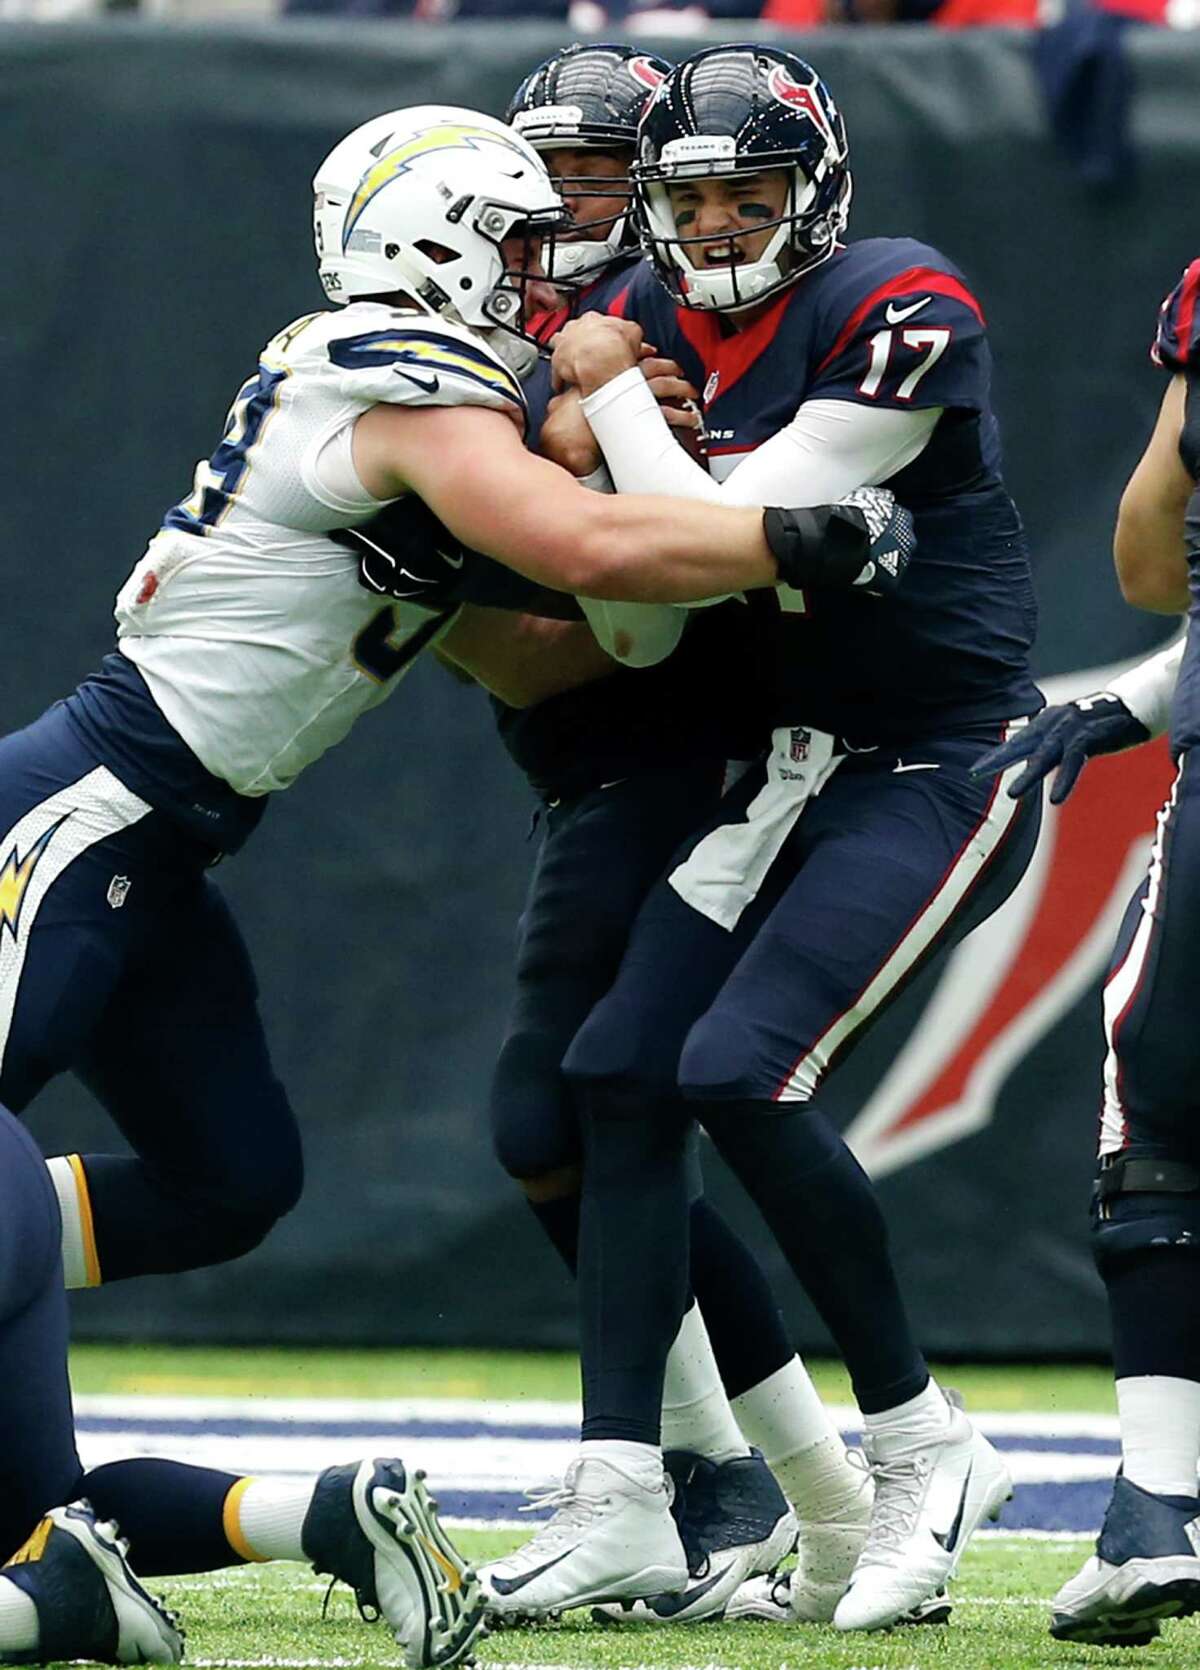 Chargers rookie Joey Bosa impactful against Texans